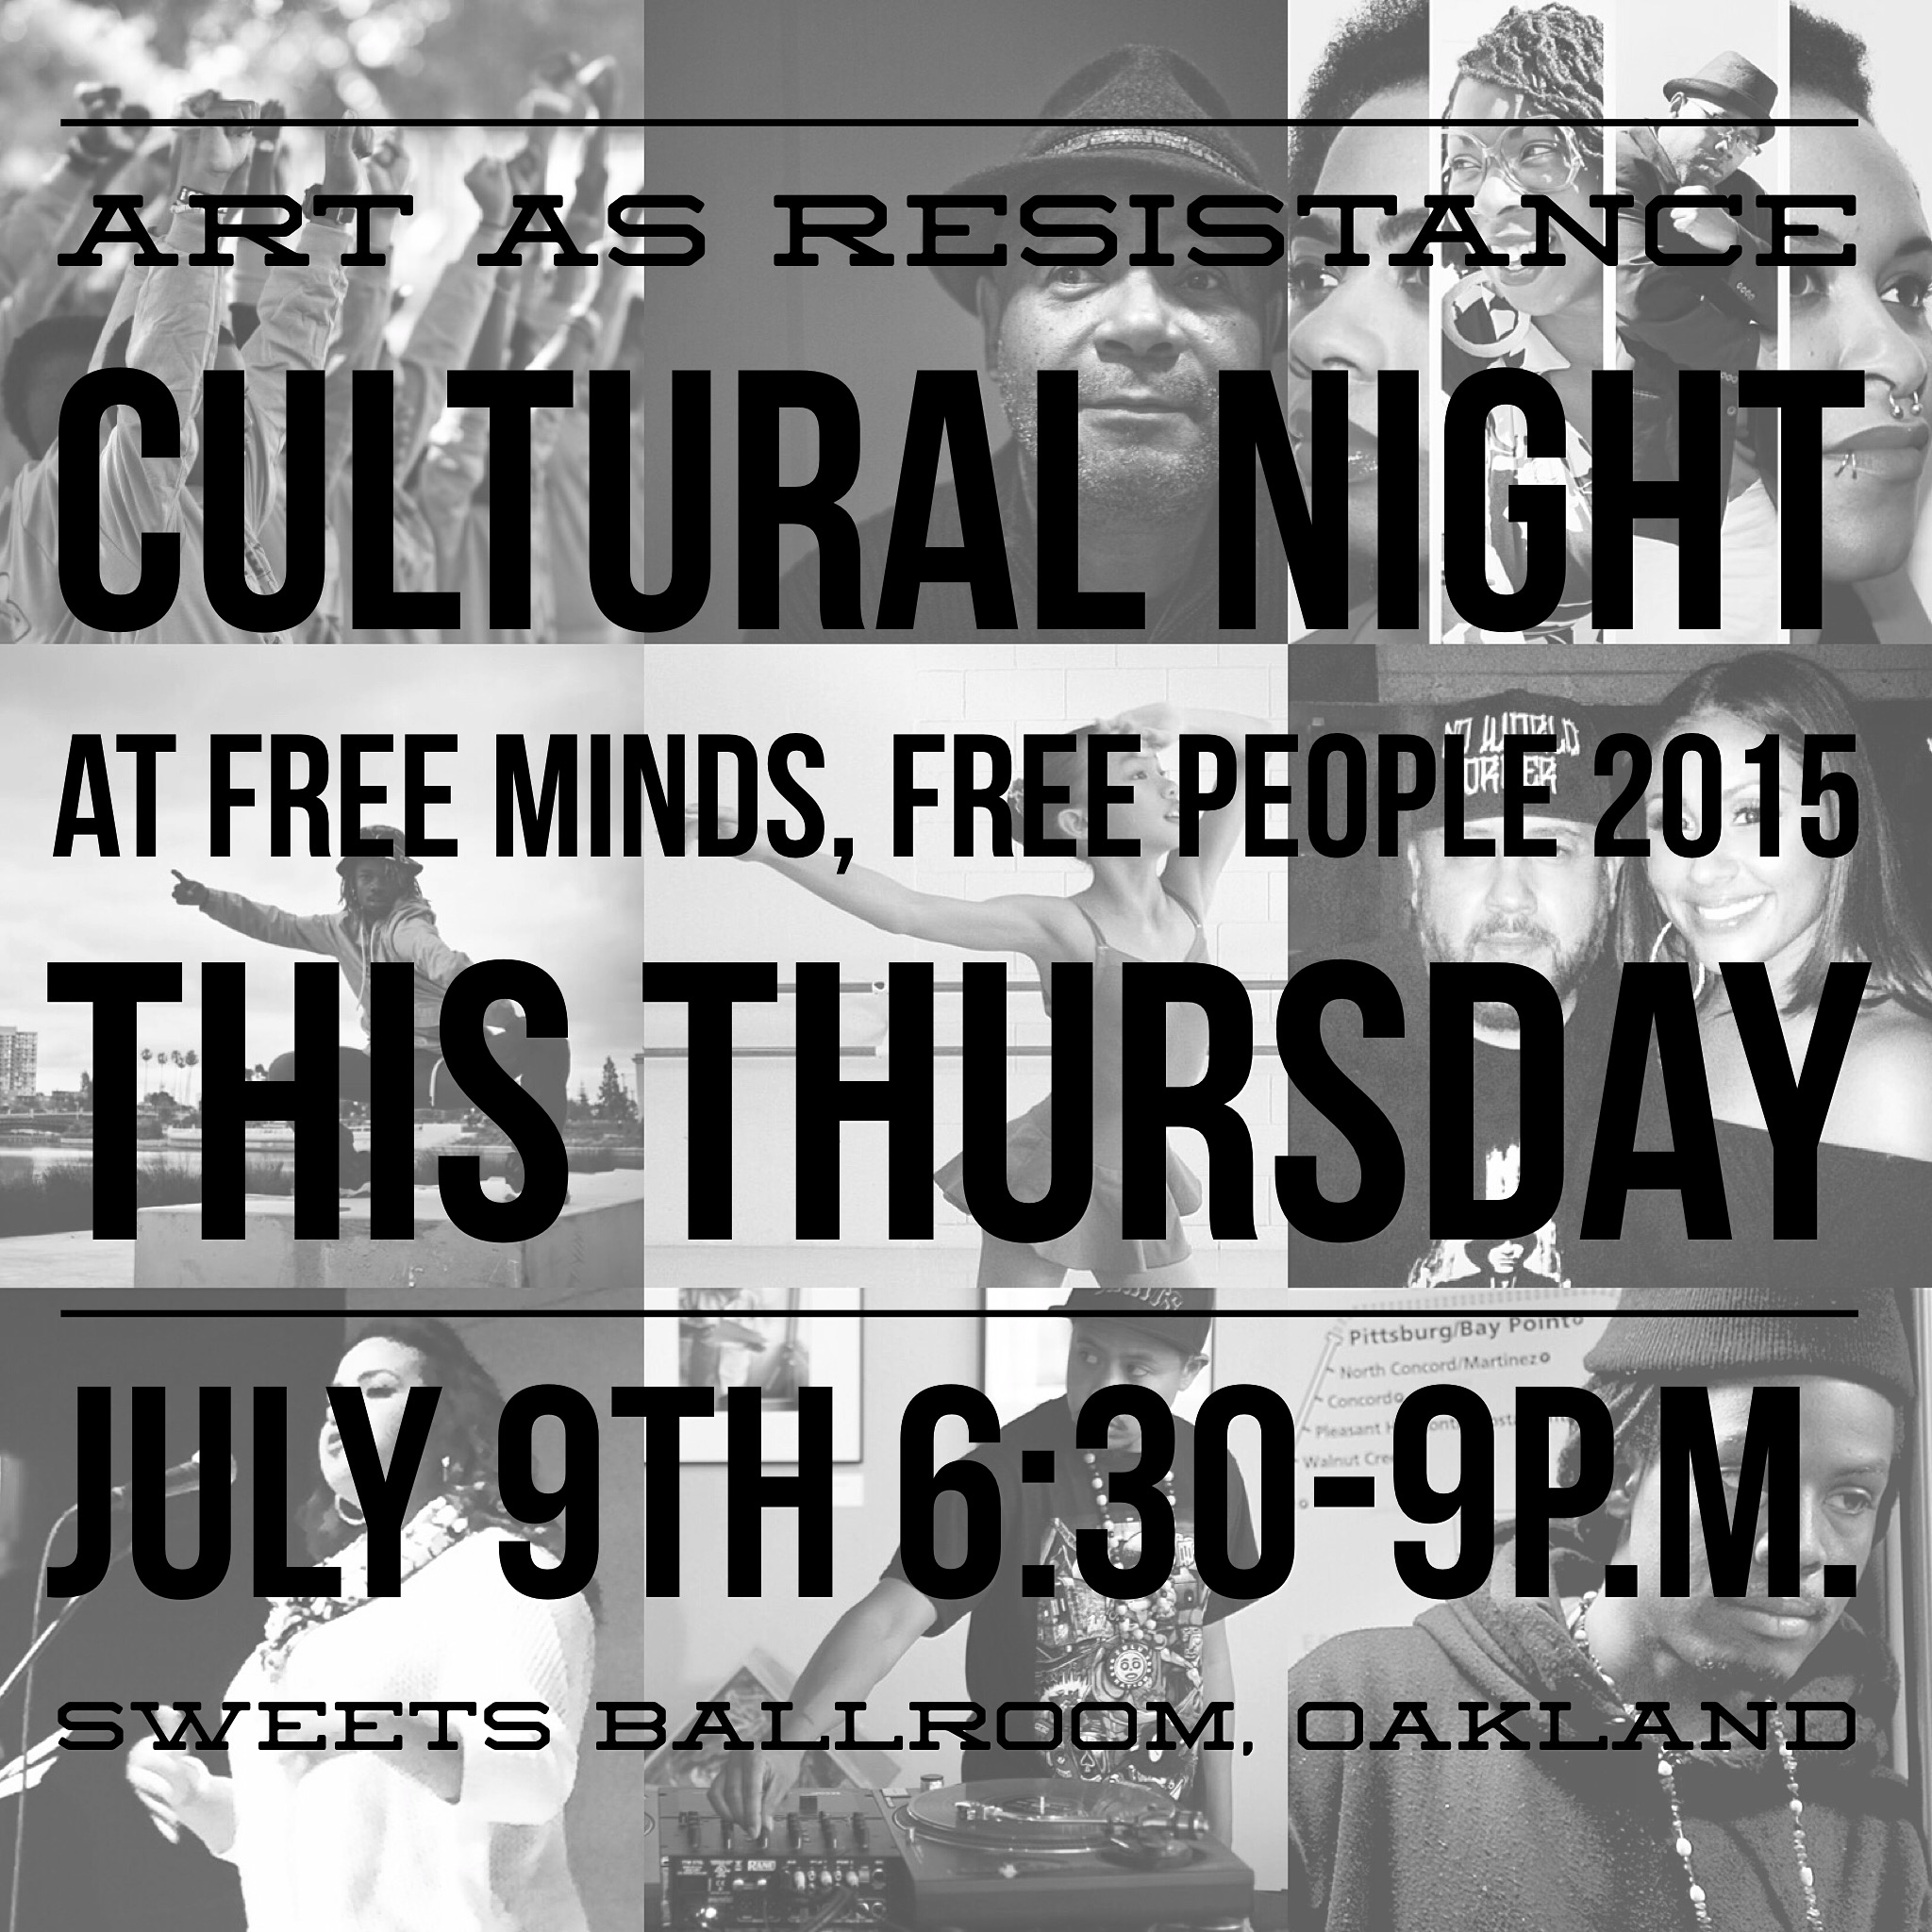 FMFP 2015 As as Resistance Cultural Night Flyer